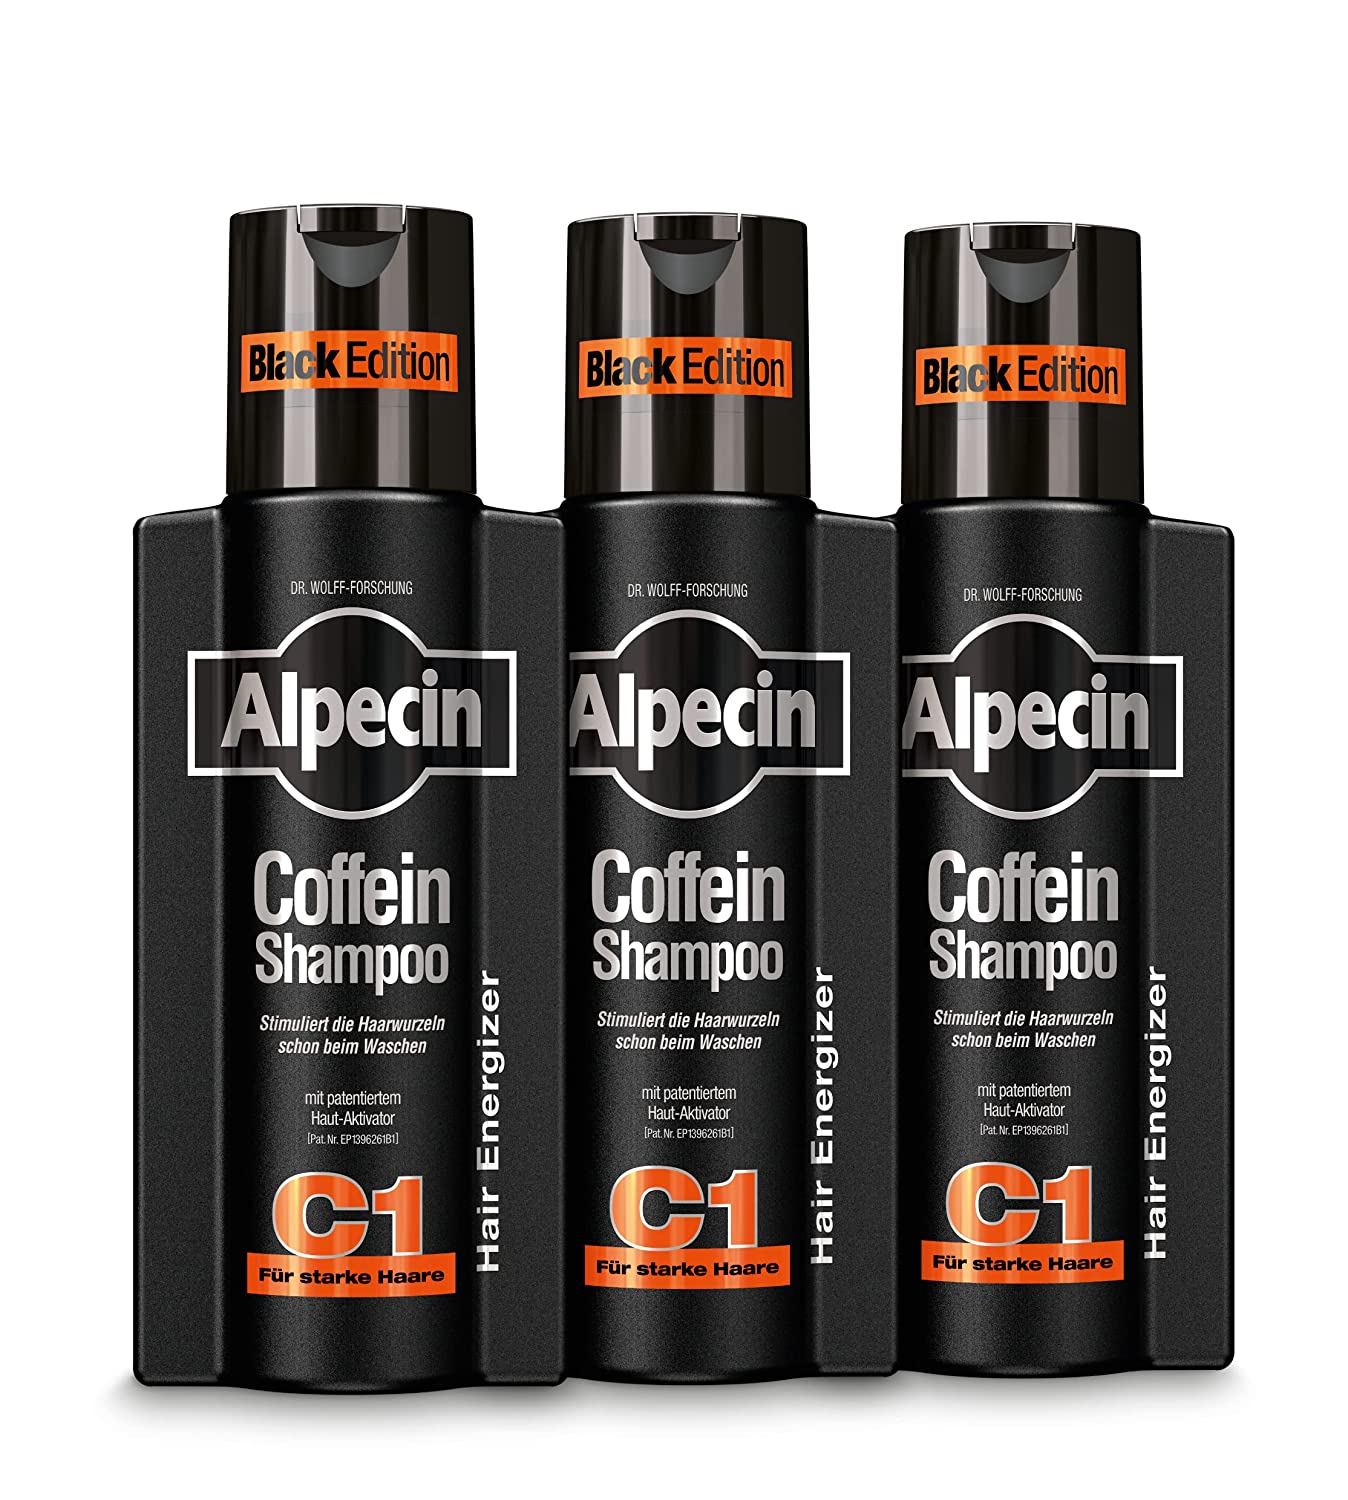 Alpecin Caffeine Shampoo C1 Black Edition - 3 x 250 ml - with New Fragrance | Natural Hair Growth for Men | Energy for Strong Hair | Hair Care for Men - Made in Germany